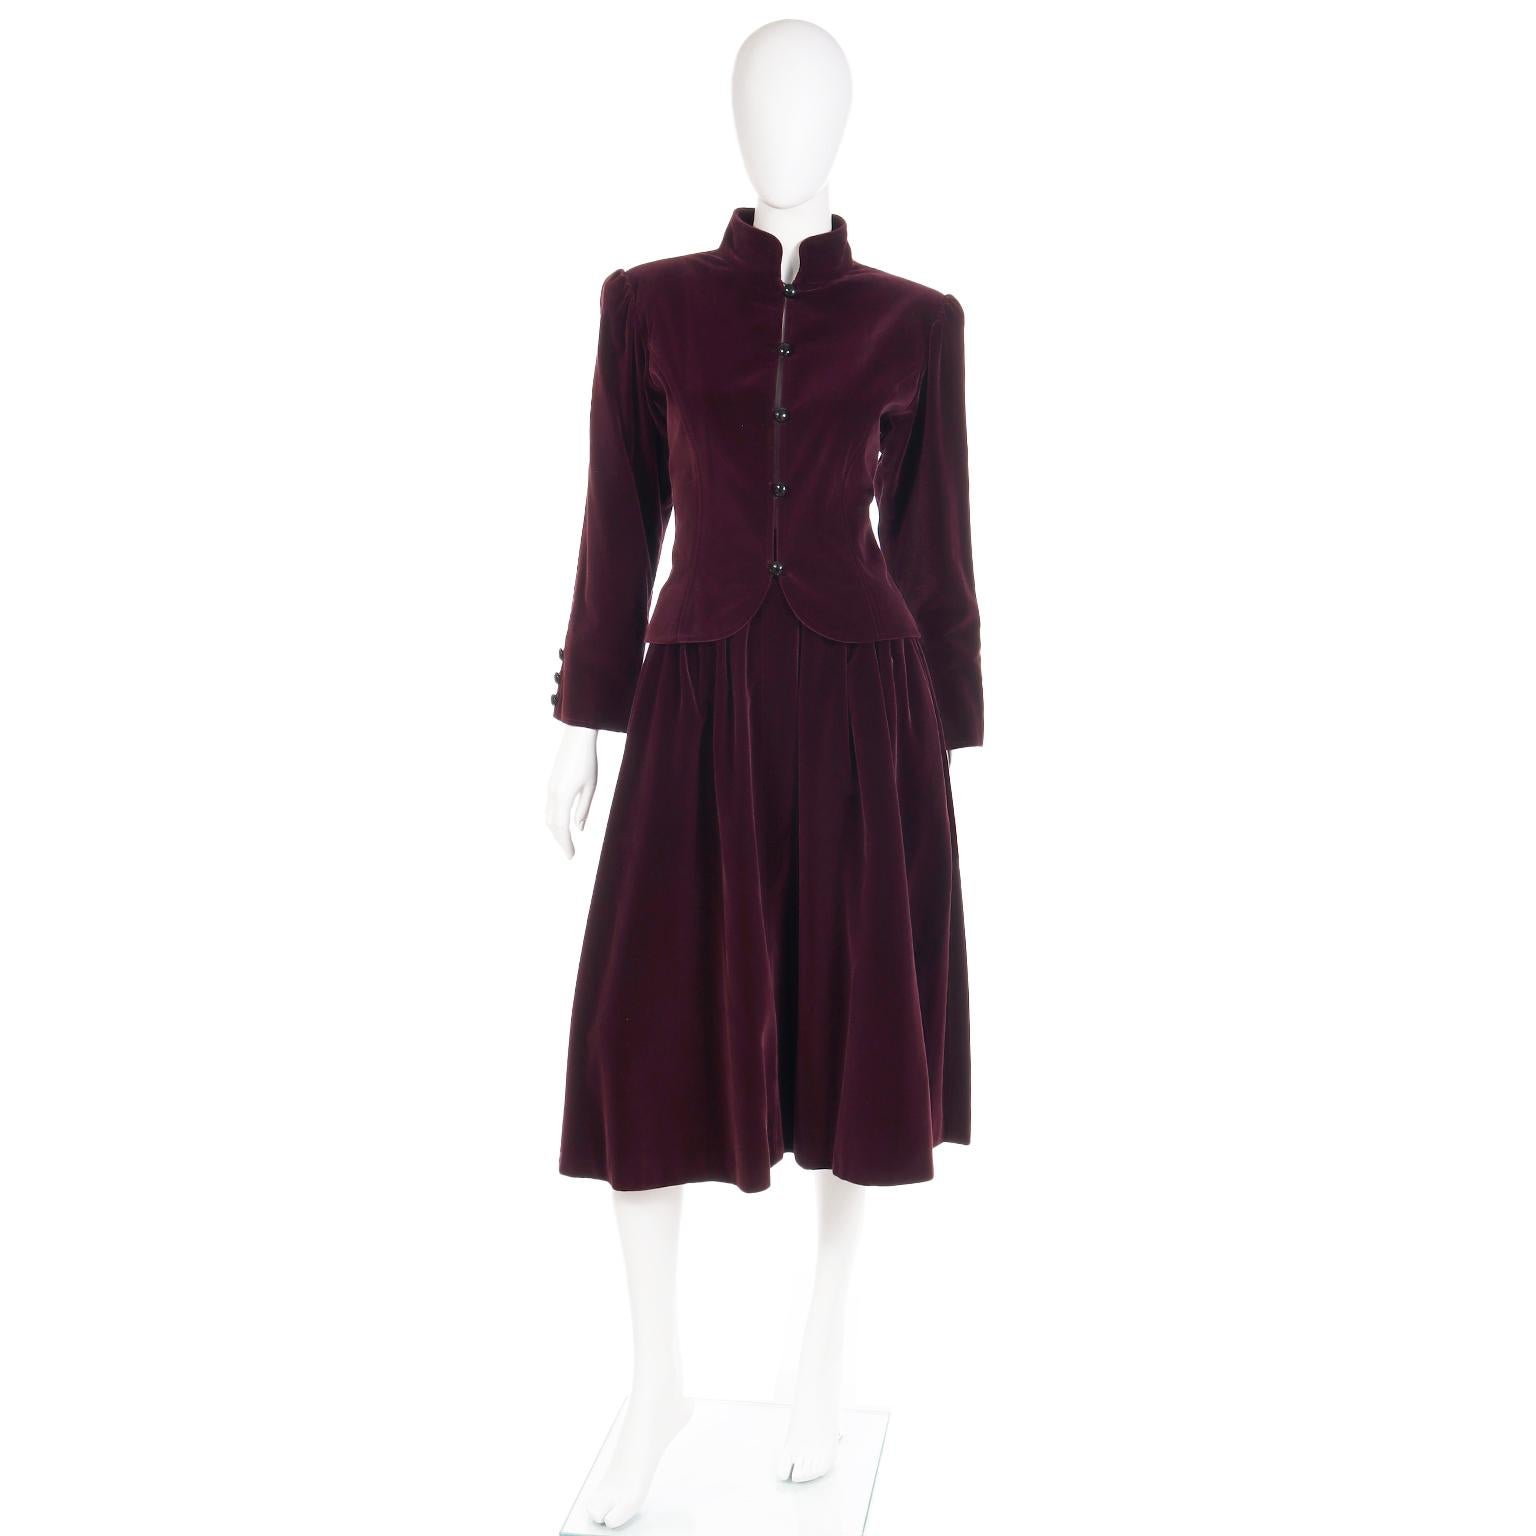 This is an outstanding Yves Saint Laurent burgundy/wine velvet skirt and jacket ensemble from the early 1980's. YSL continued to be inspired by Russian Czar era clothing and the costumes from Ballet Russes. He incorporated modern elements and